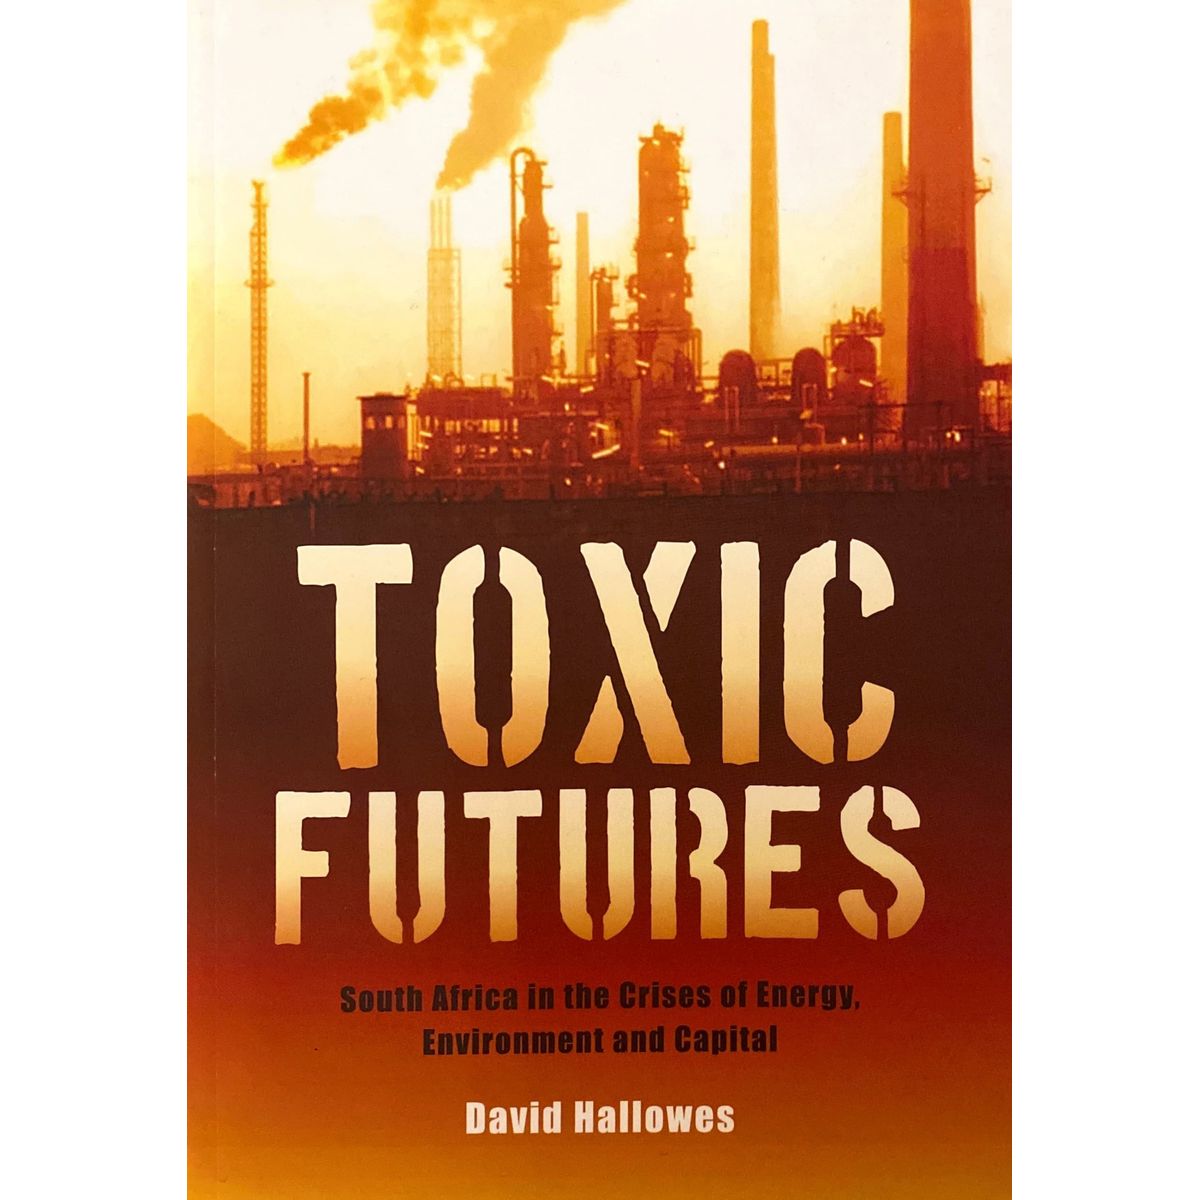 ISBN: 9781869142117 / 186914211X - Toxic Futures: South Africa in the Crises of Energy, Environment and Capital by David Hallowes [2011]